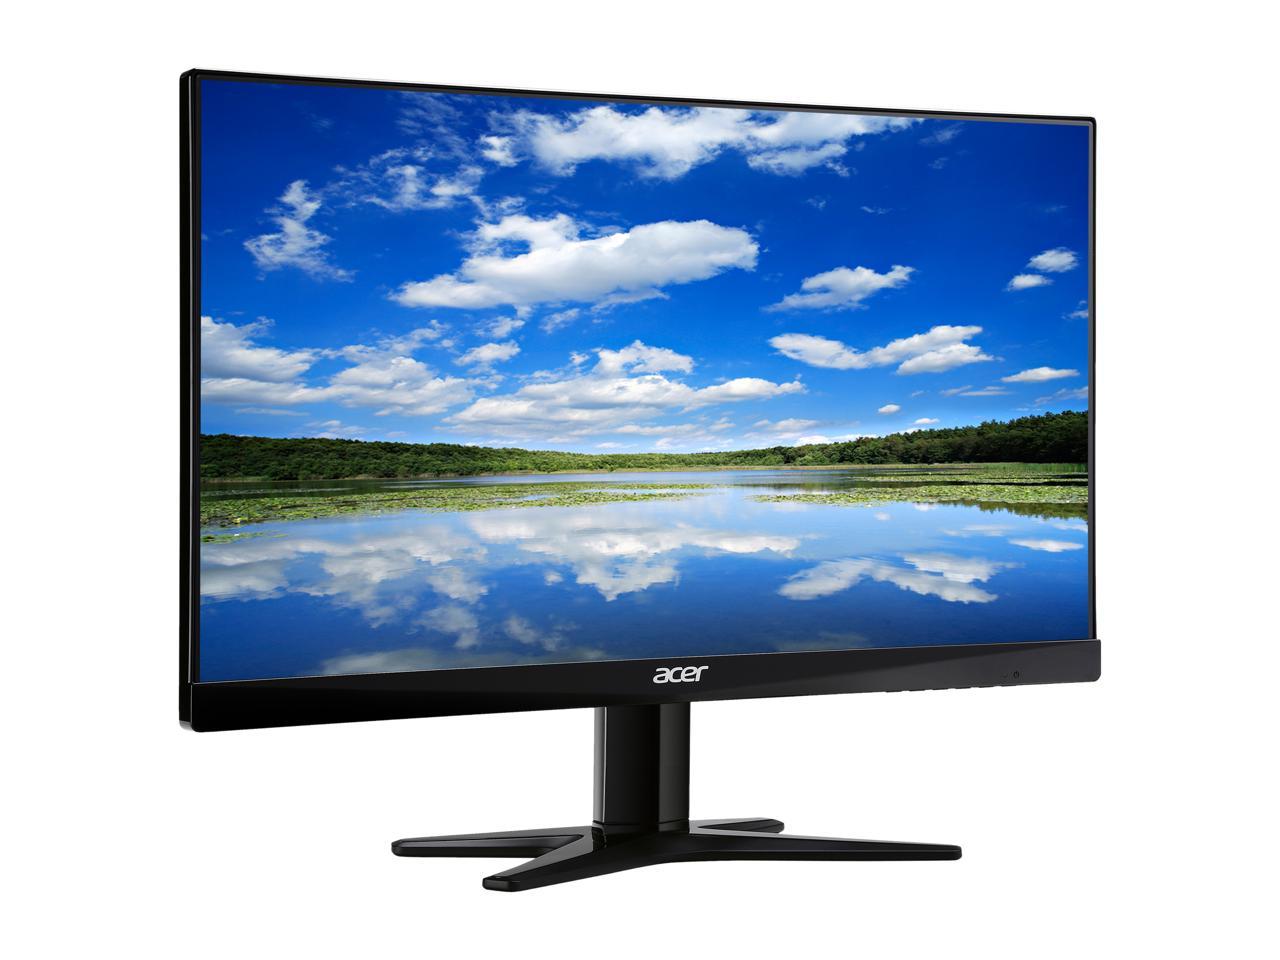 Acer G7 Series G247HYL bmidx Black 23.8" IPS 4ms (GTG) Black Widescreen LED/LCD Monitor 1920 x 1080 FHD, Slim Frame Design, w/ Acer Flicker Less Technology, Visual Comfortable, and Build in Speakers